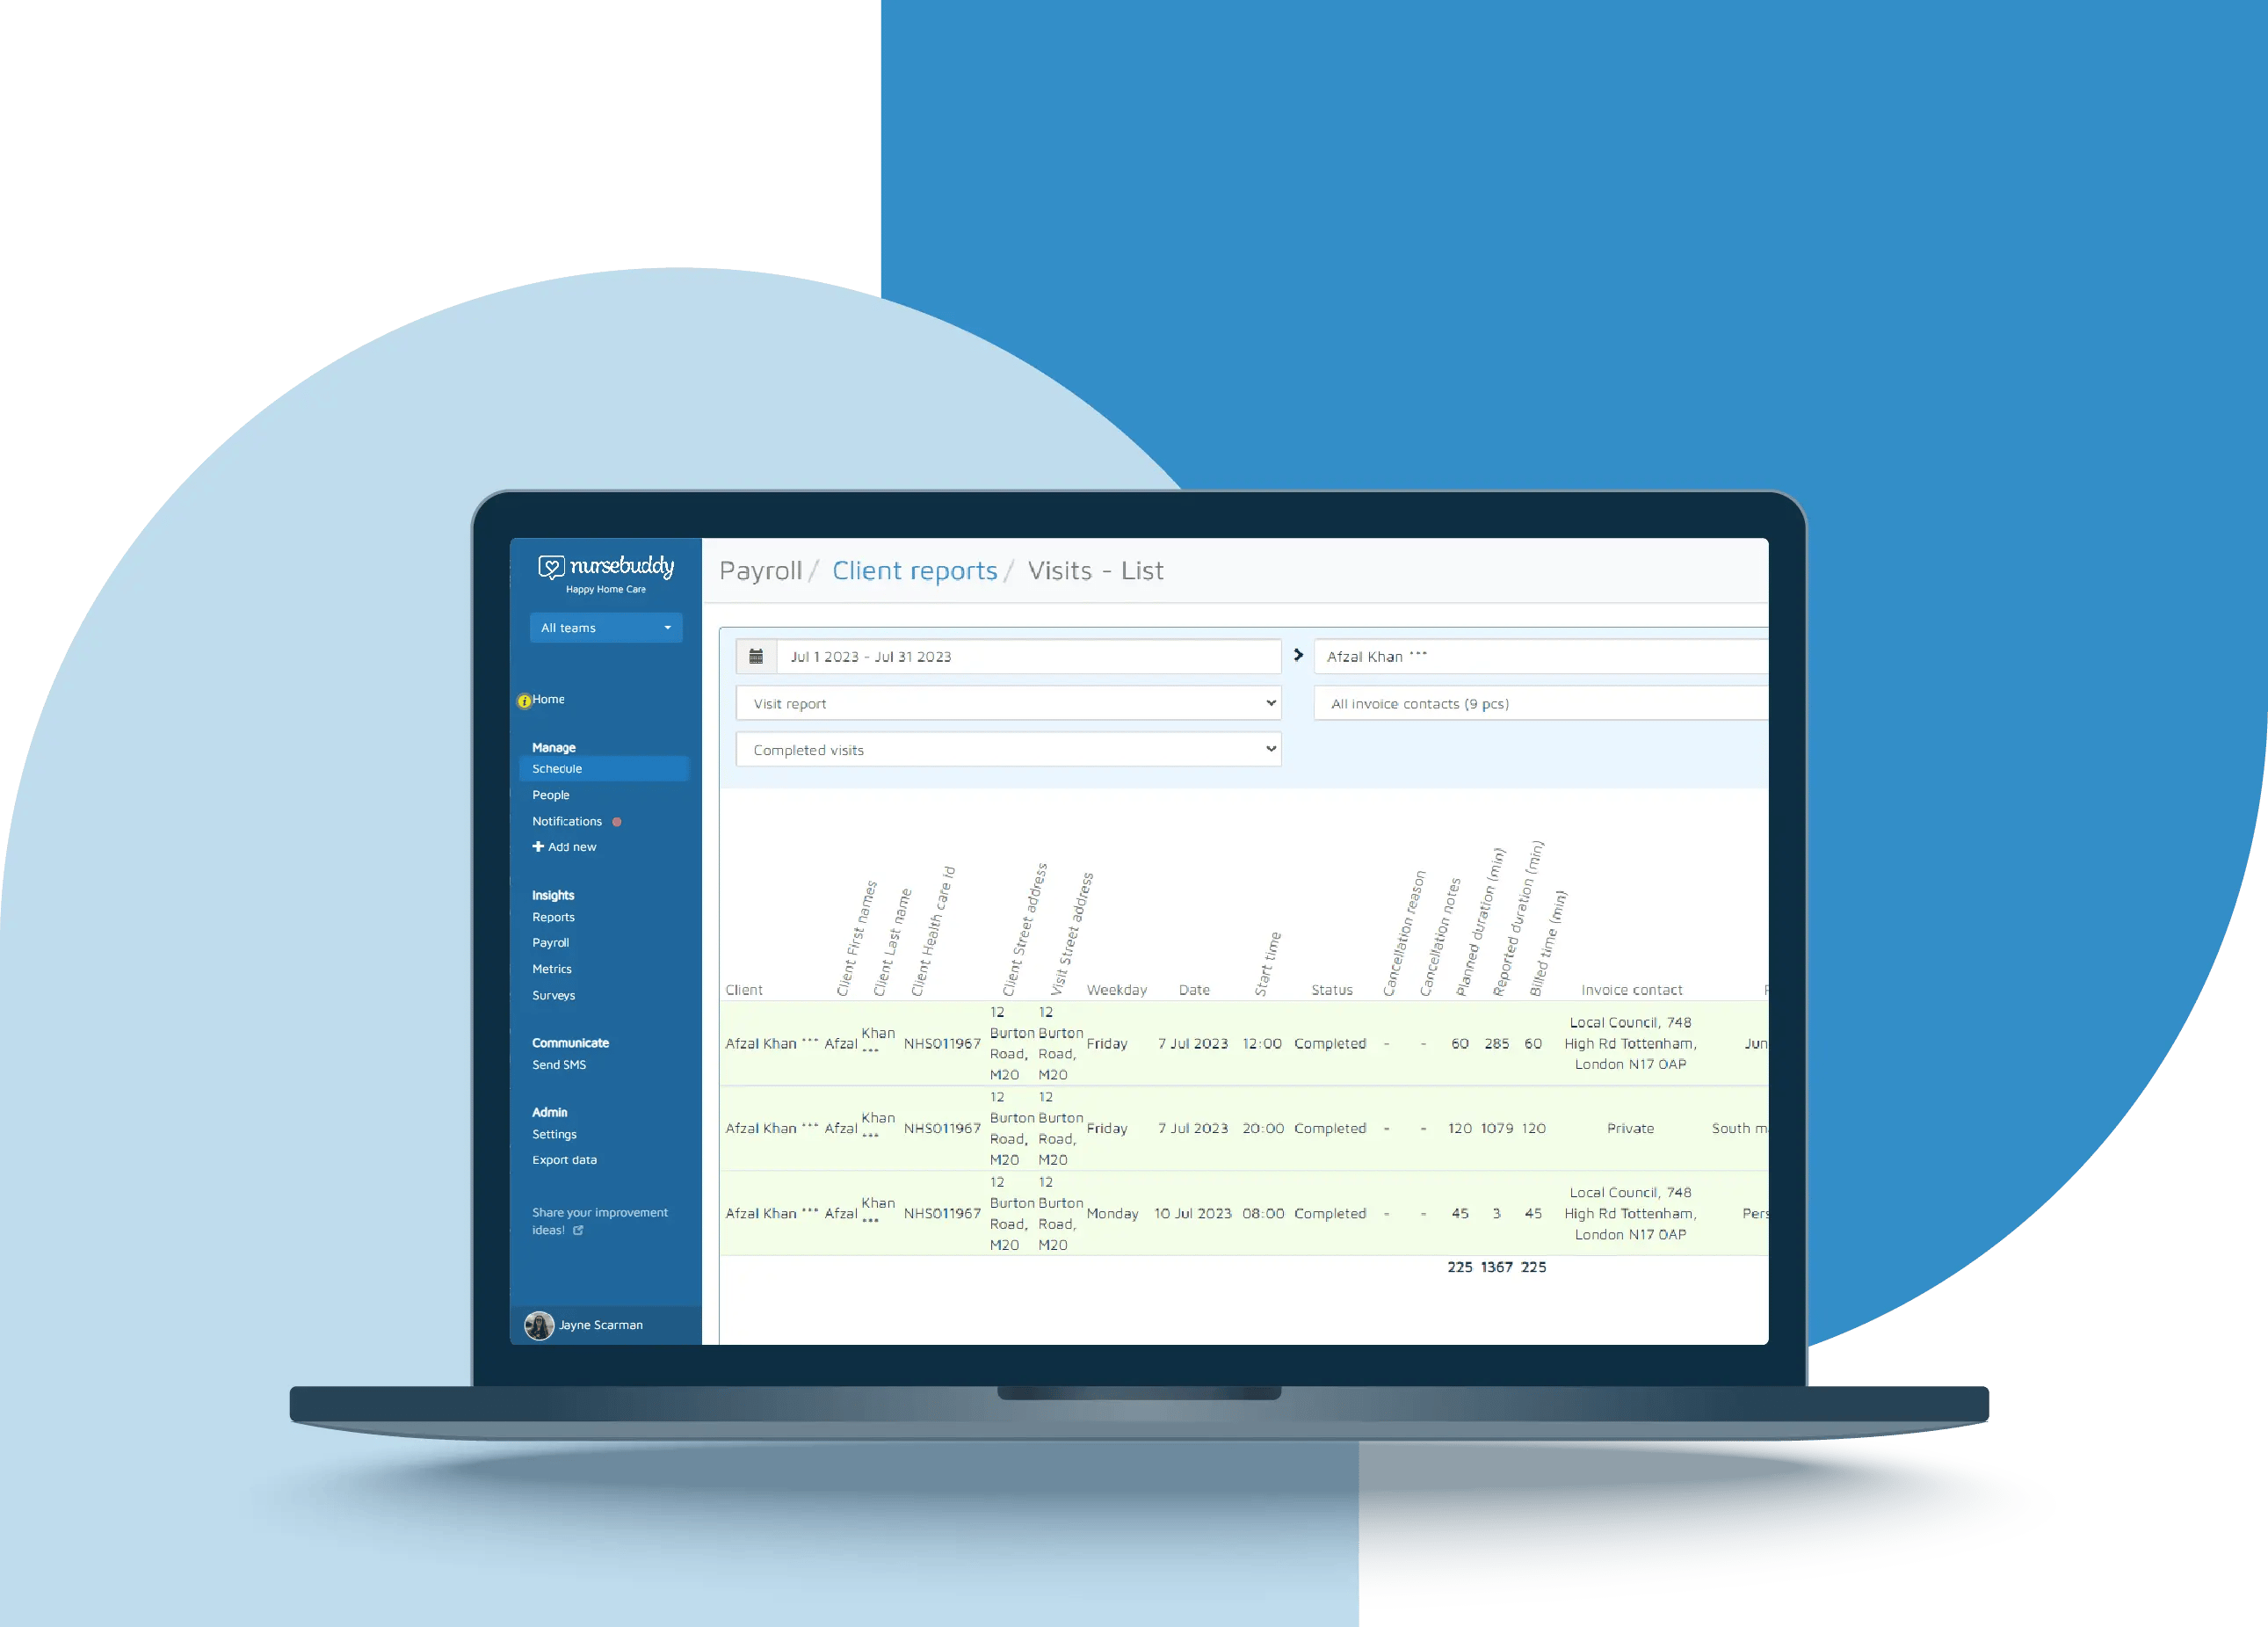 An invoicing report in Nursebuddy, displayed on a laptop